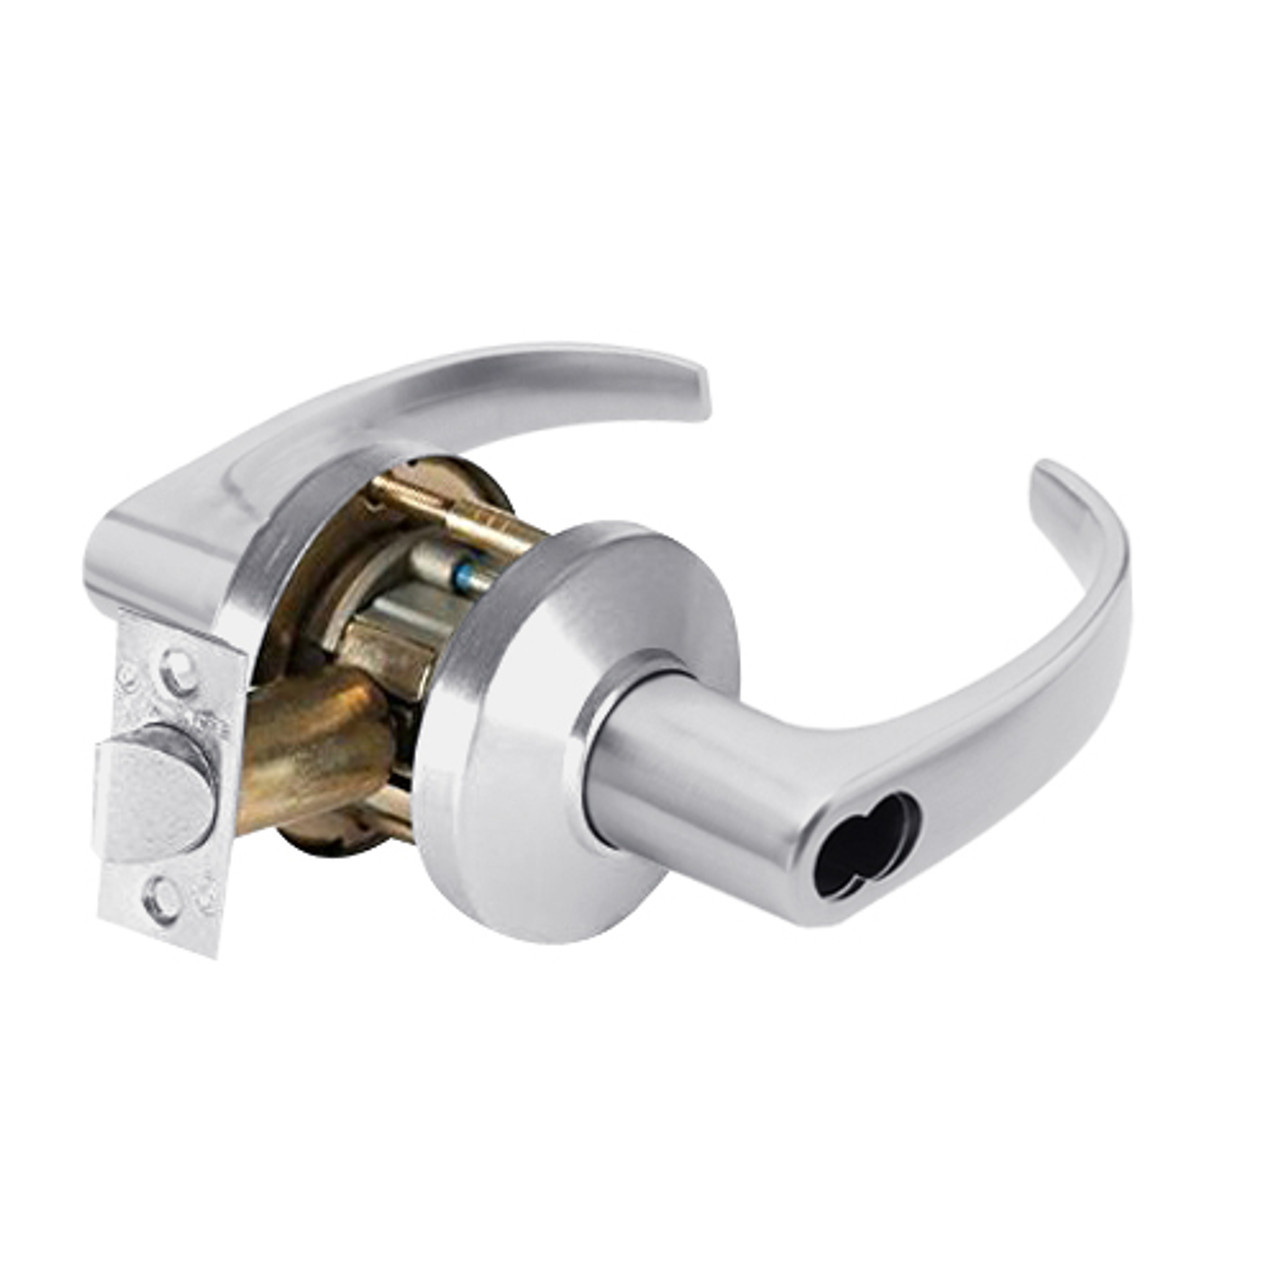 9K37YR14CSTK626LM Best 9K Series Special Function Cylindrical Lever Locks with Curved with Return Lever Design Accept 7 Pin Best Core in Satin Chrome